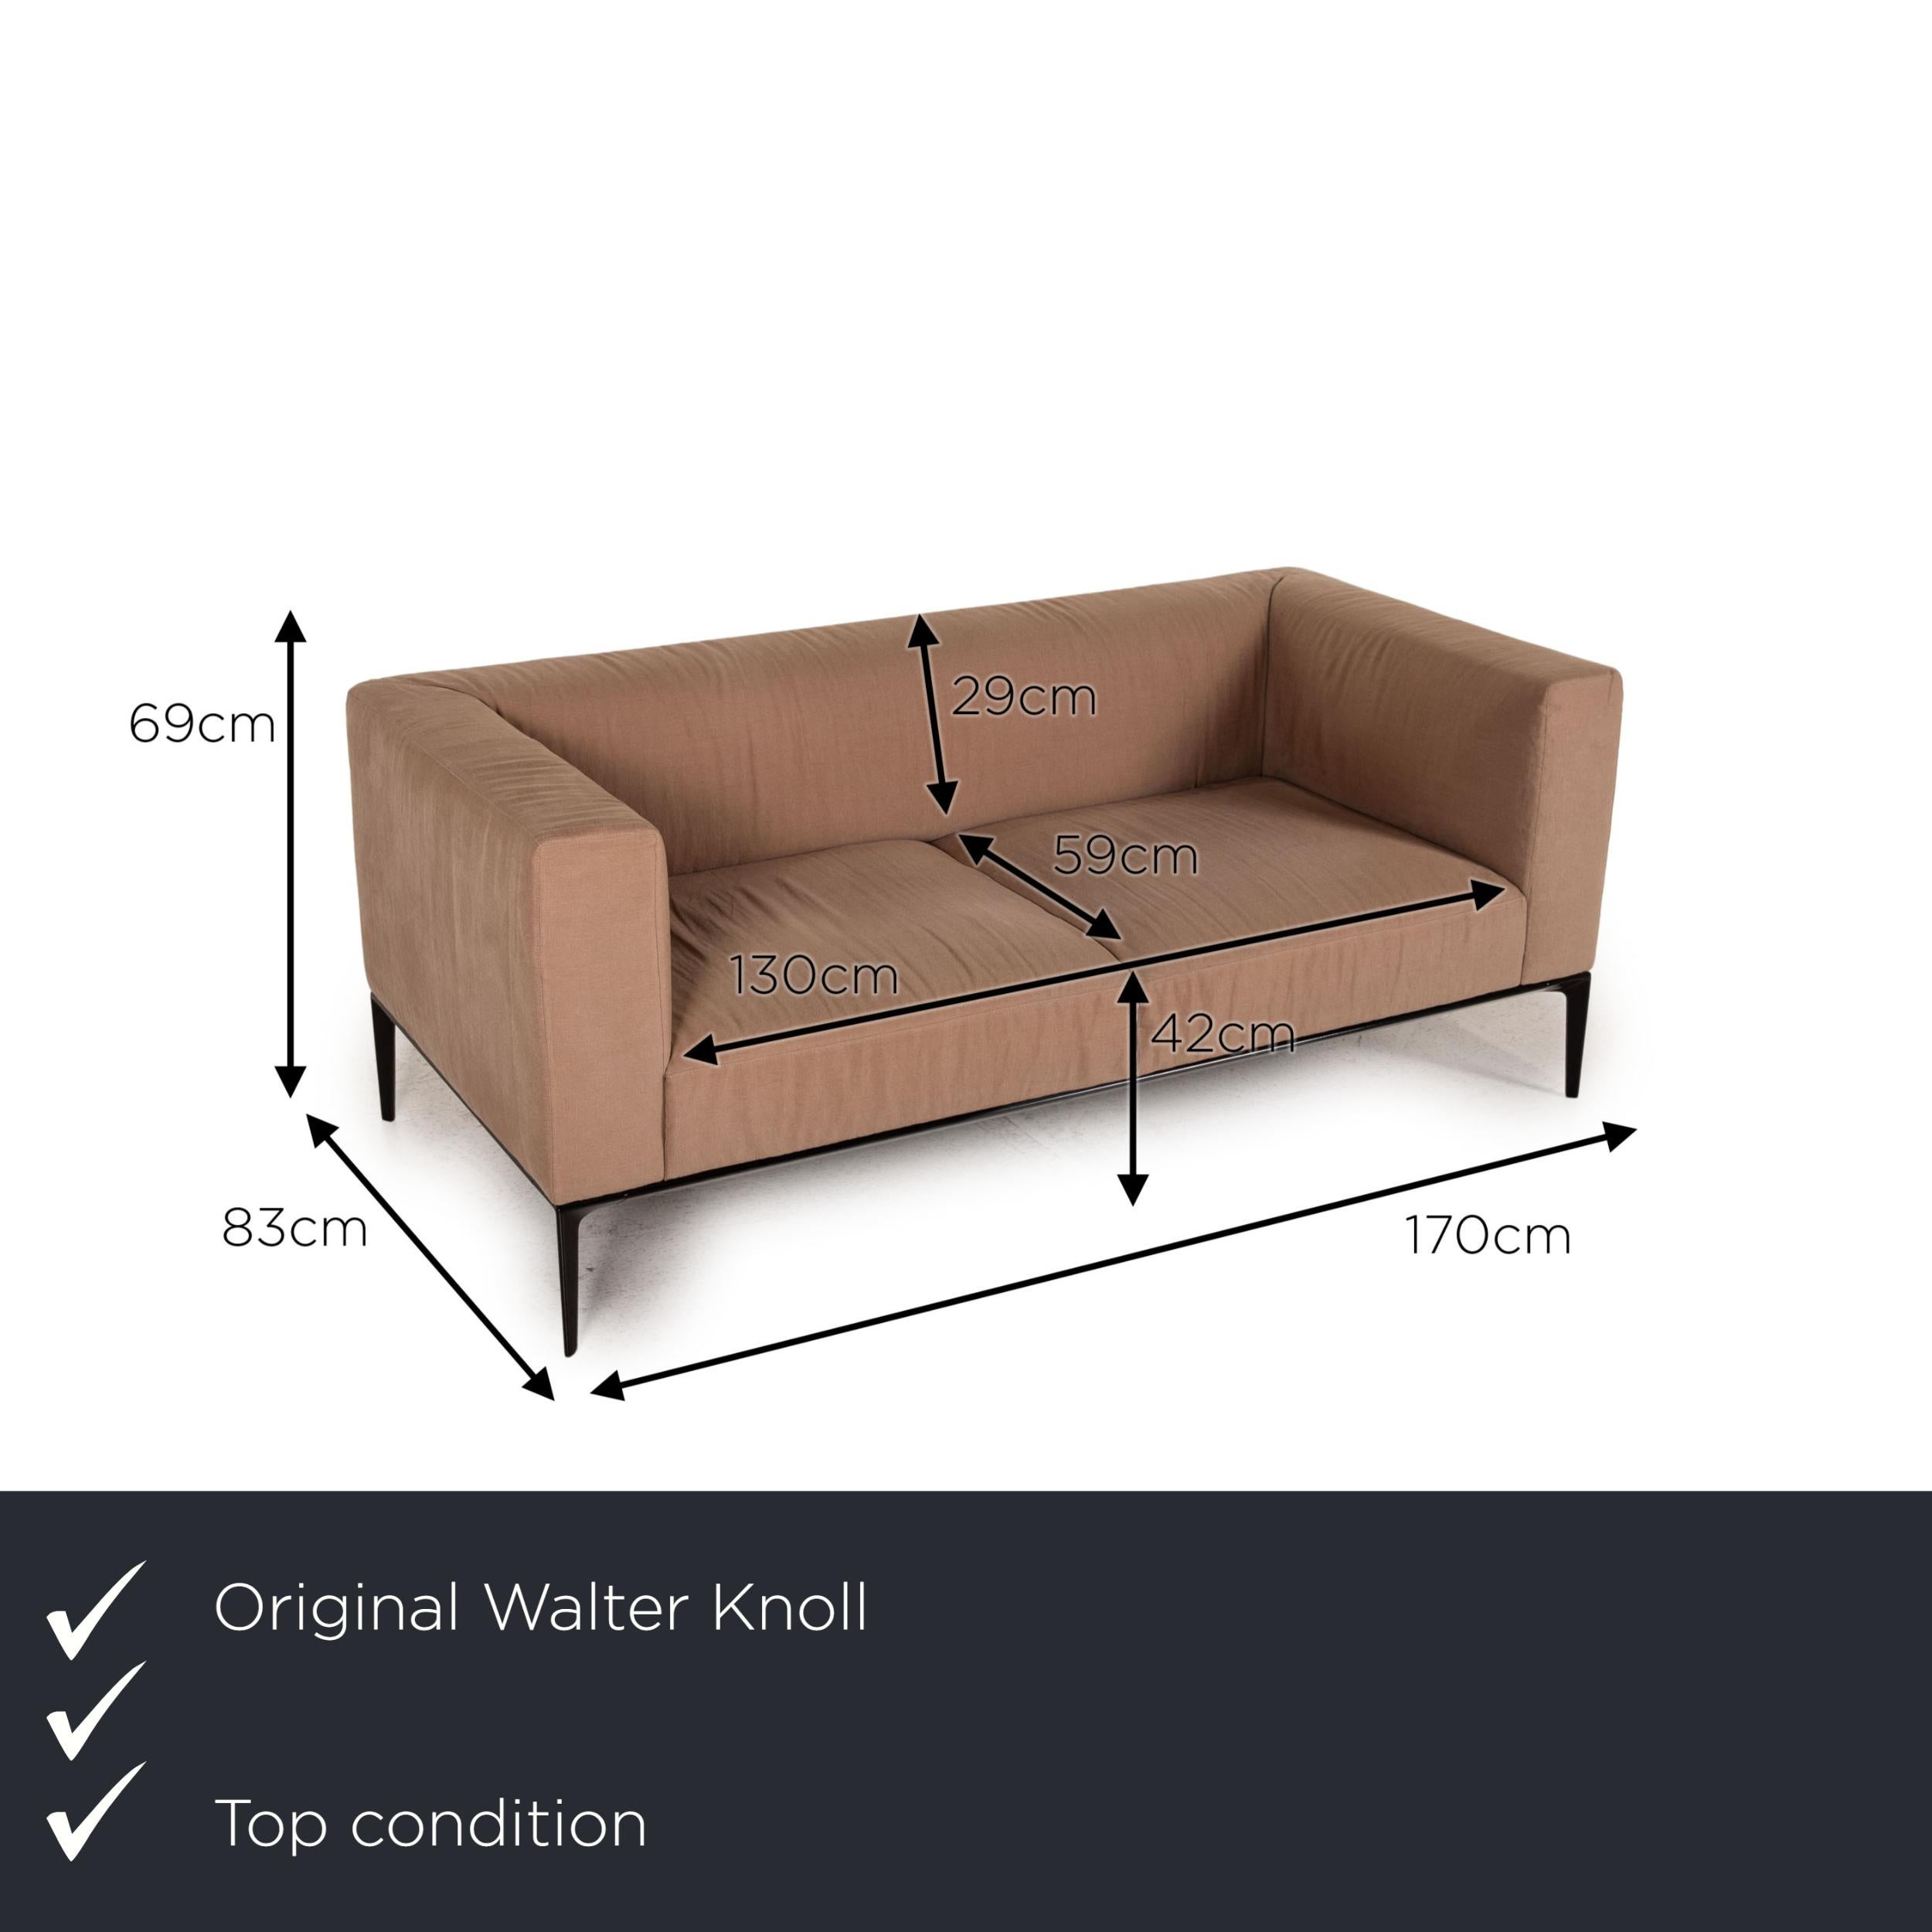 We present to you a Walter Knoll Jaan Living fabric sofa beige two-seater couch.

 

 Product measurements in centimeters:
 

 depth: 83
 width: 170
 height: 69
 seat height: 42
 rest height: 69
 seat depth: 59
 seat width: 130
 back